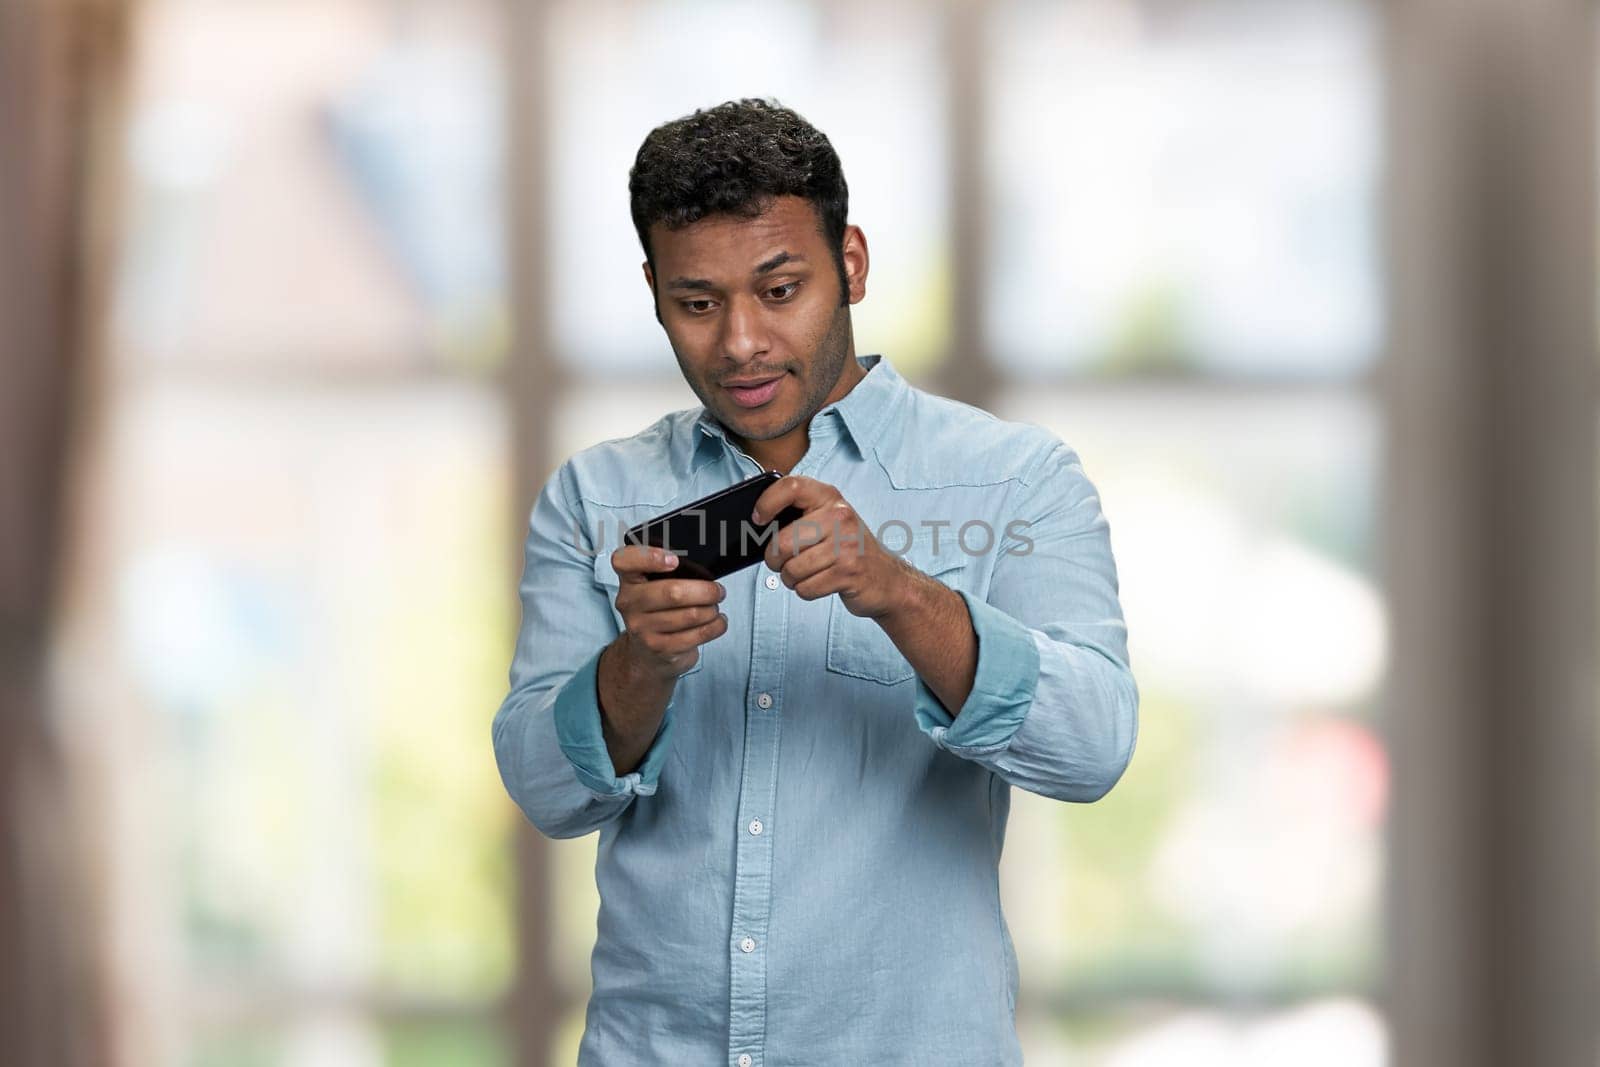 Attractive young man playing game on his smartphone. Blur interior background.